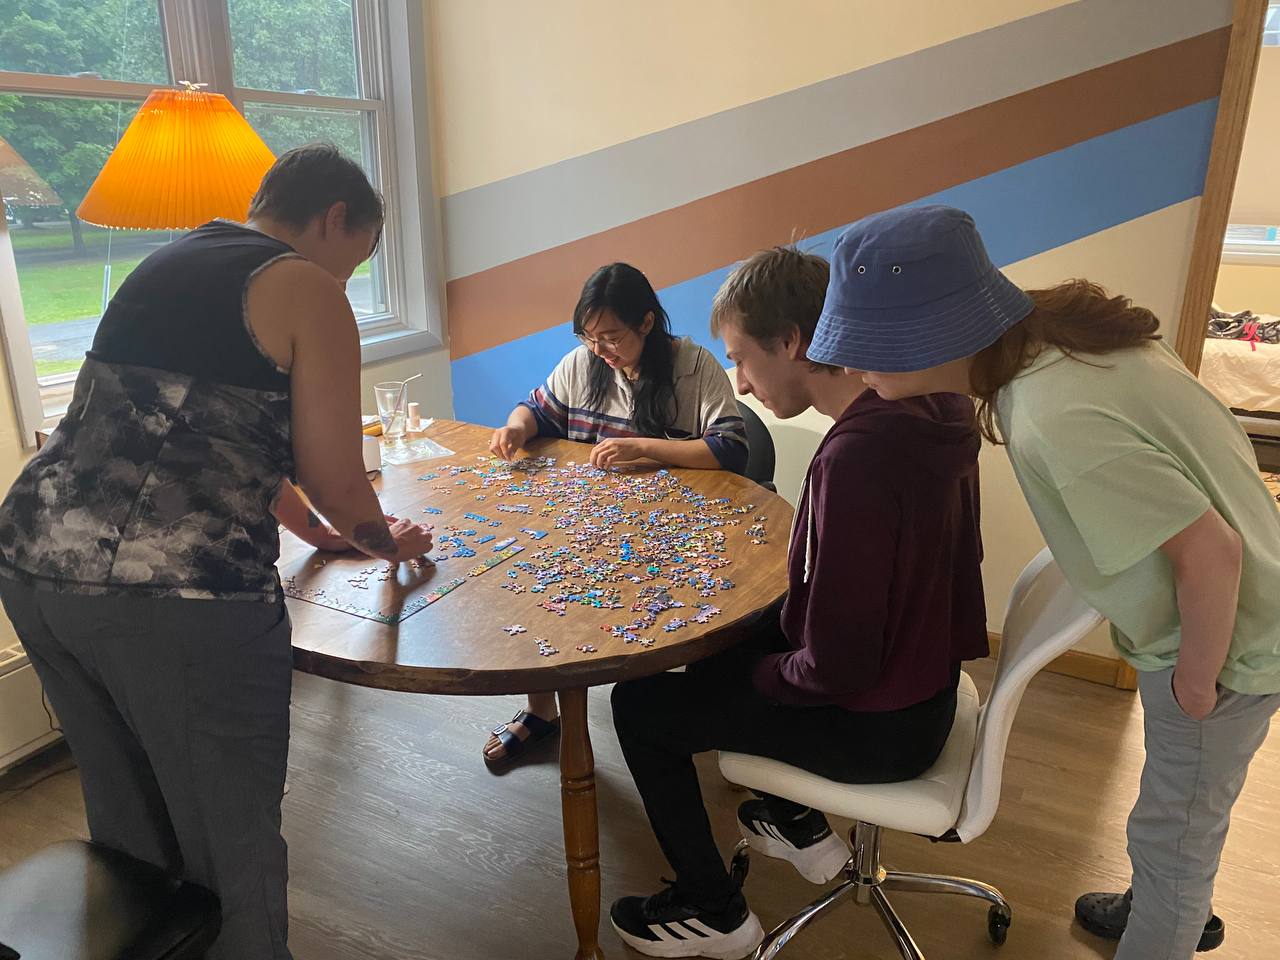 Group working on a tabletop puzzle